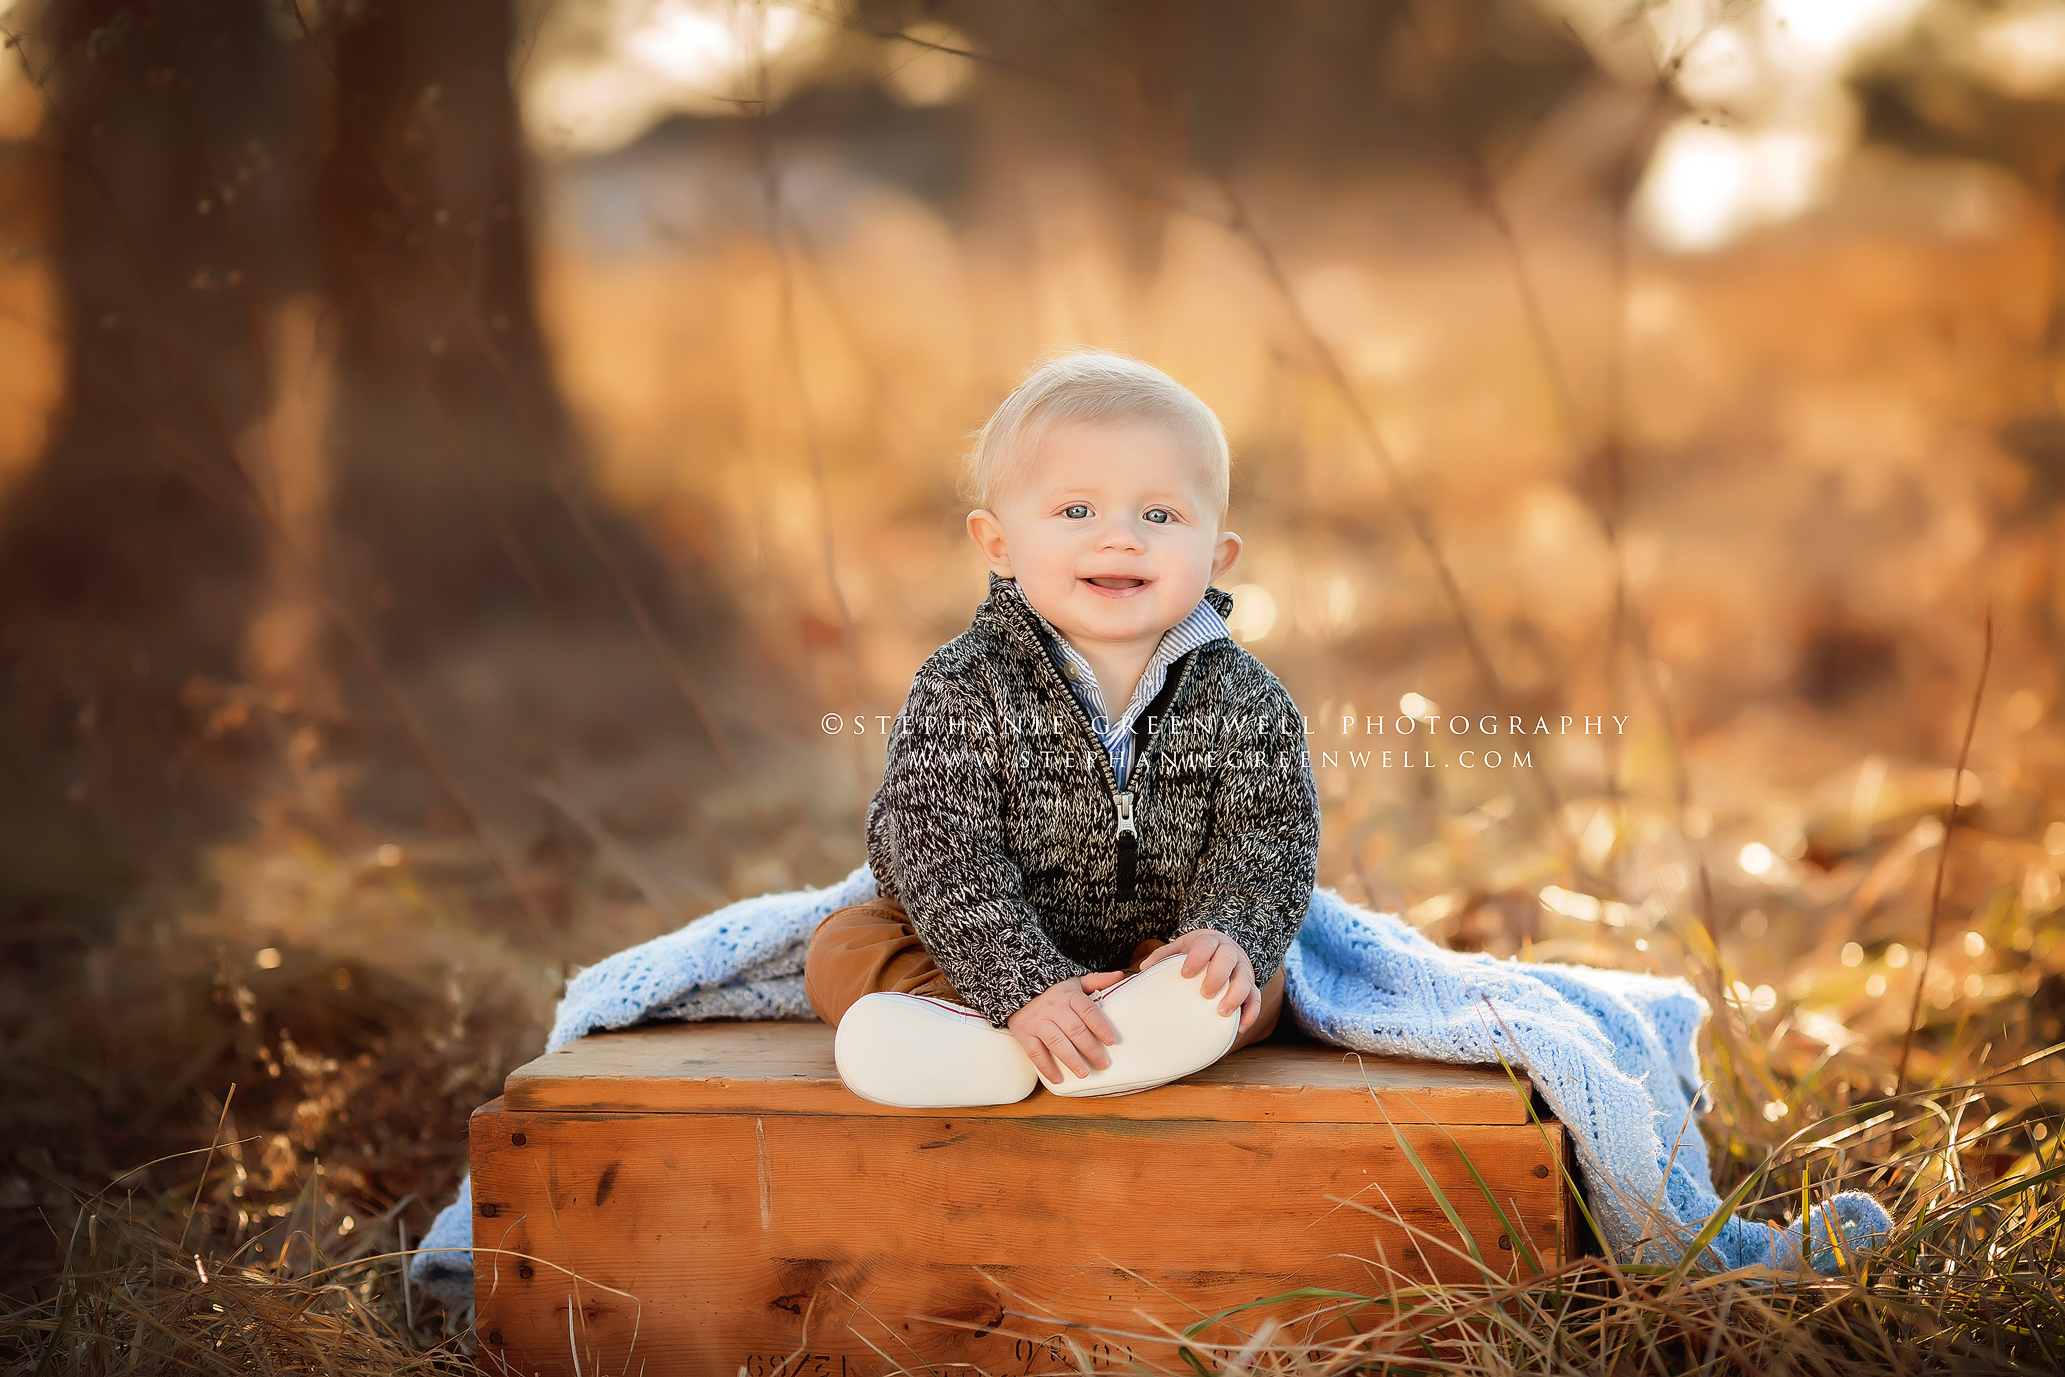 baby outdoors woods wooden box southeast missouri photographer stephanie greenwell